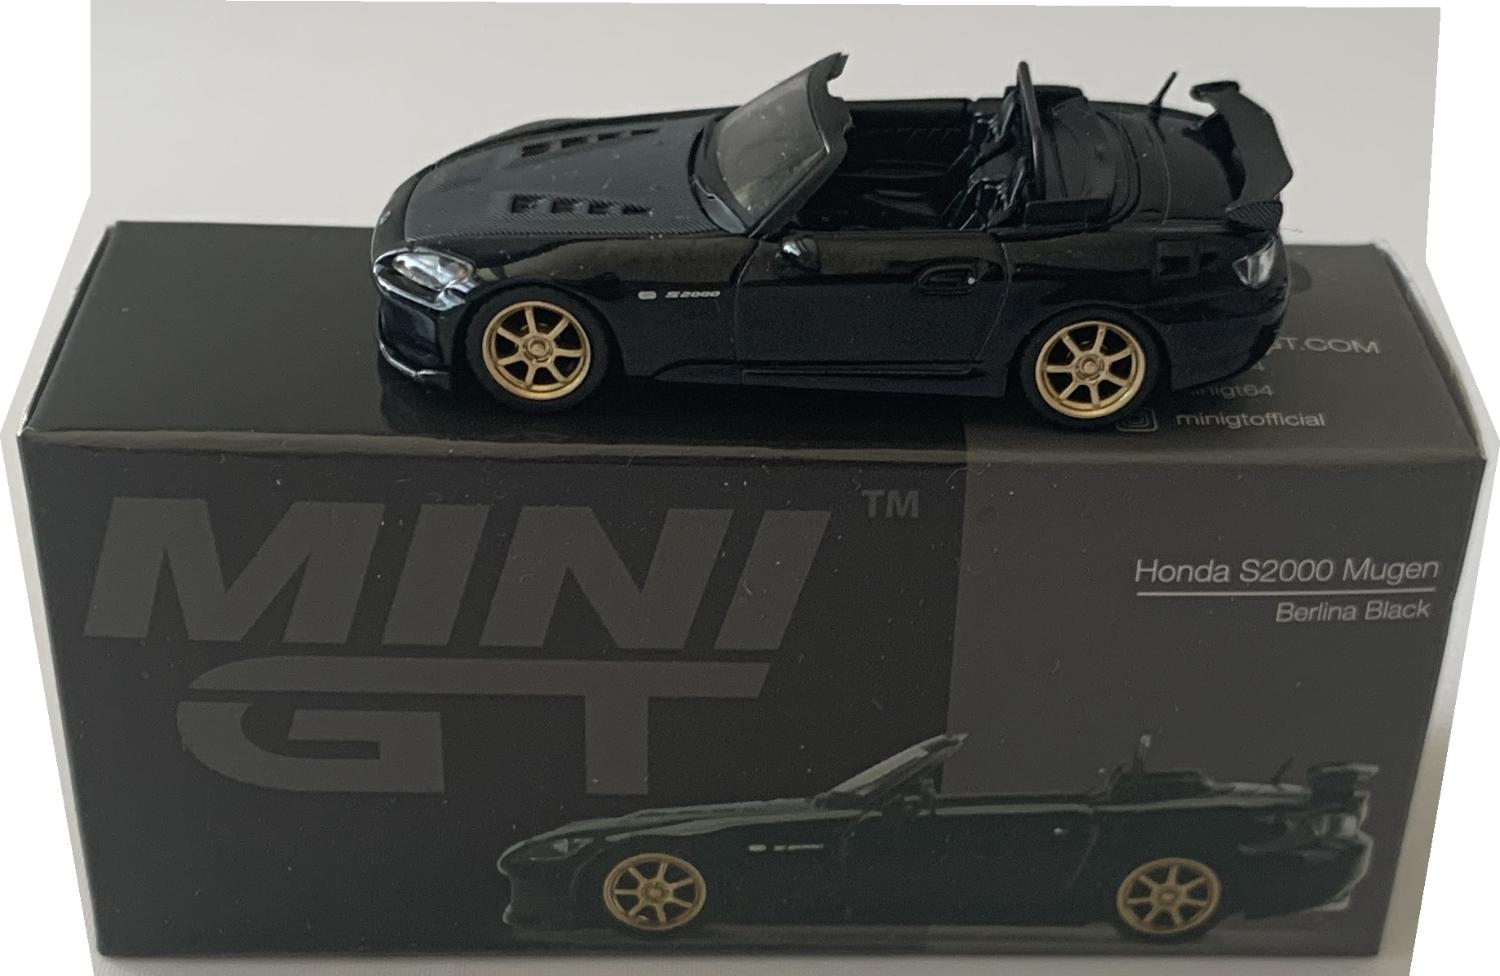 A good reproduction of the Honda S2000 (AP2) with detail throughout, all authentically recreated.  The model is presented in a box, the car is approx. 6.5 cm long and the box is 10 cm long